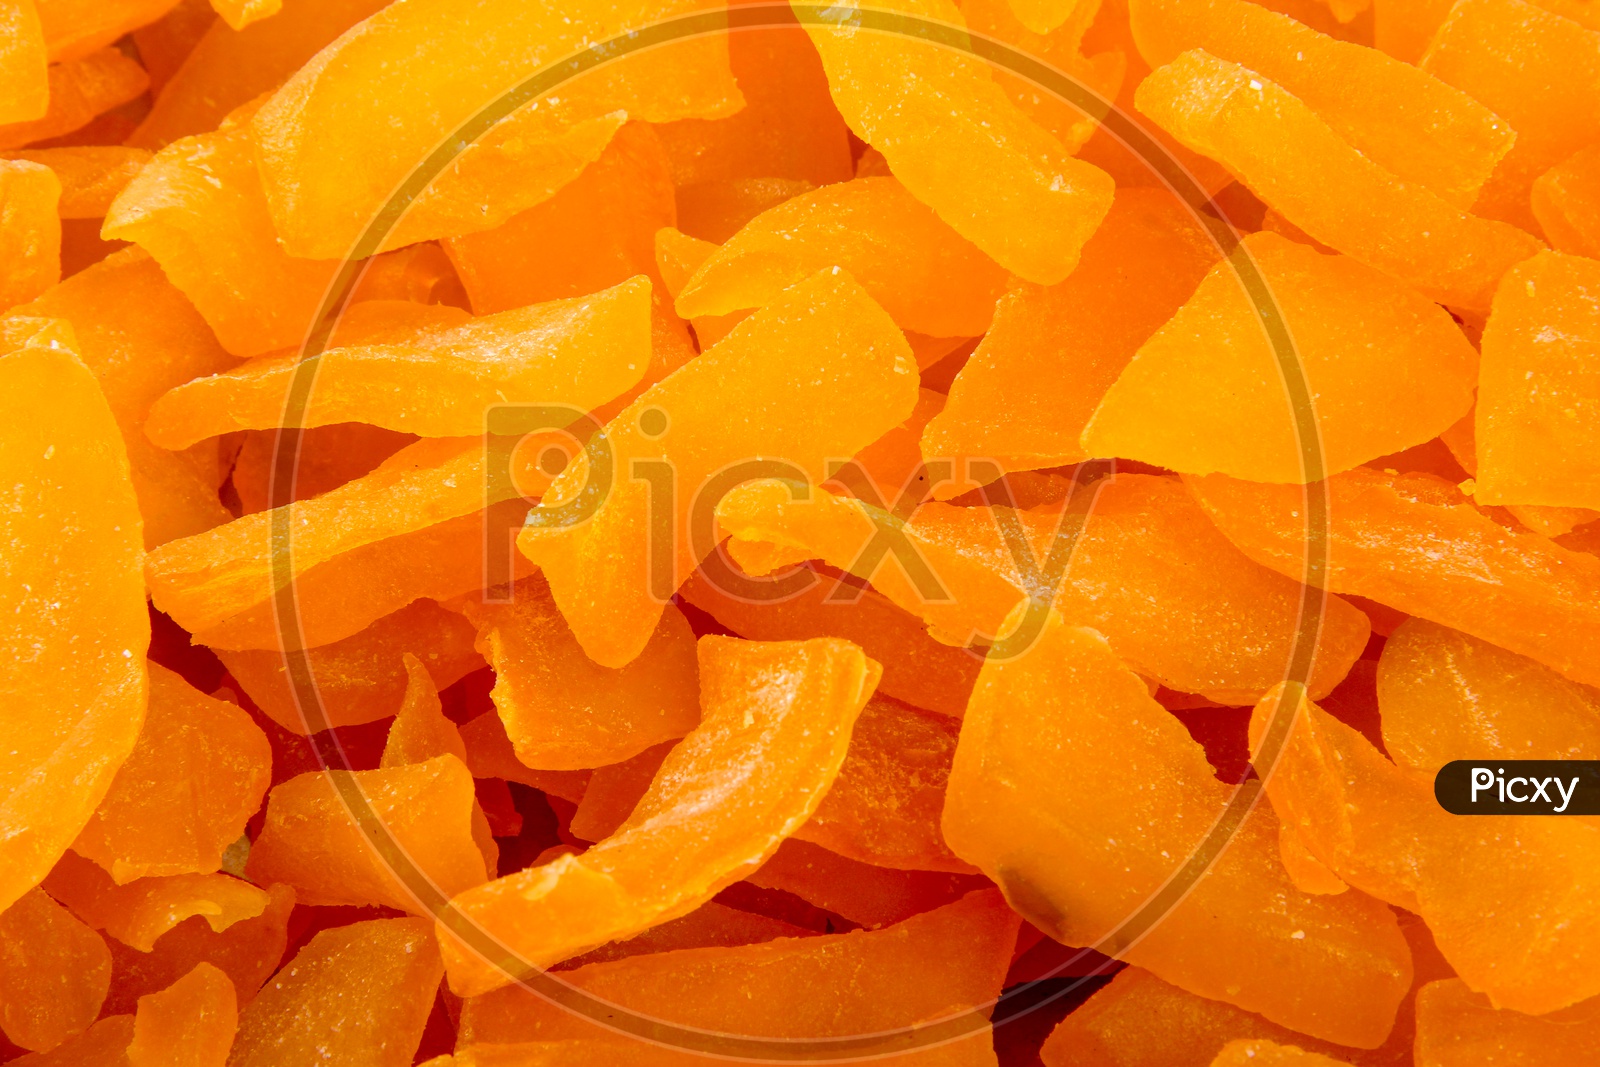 Dried Mango Slices Composition Shot Forming a Back Ground